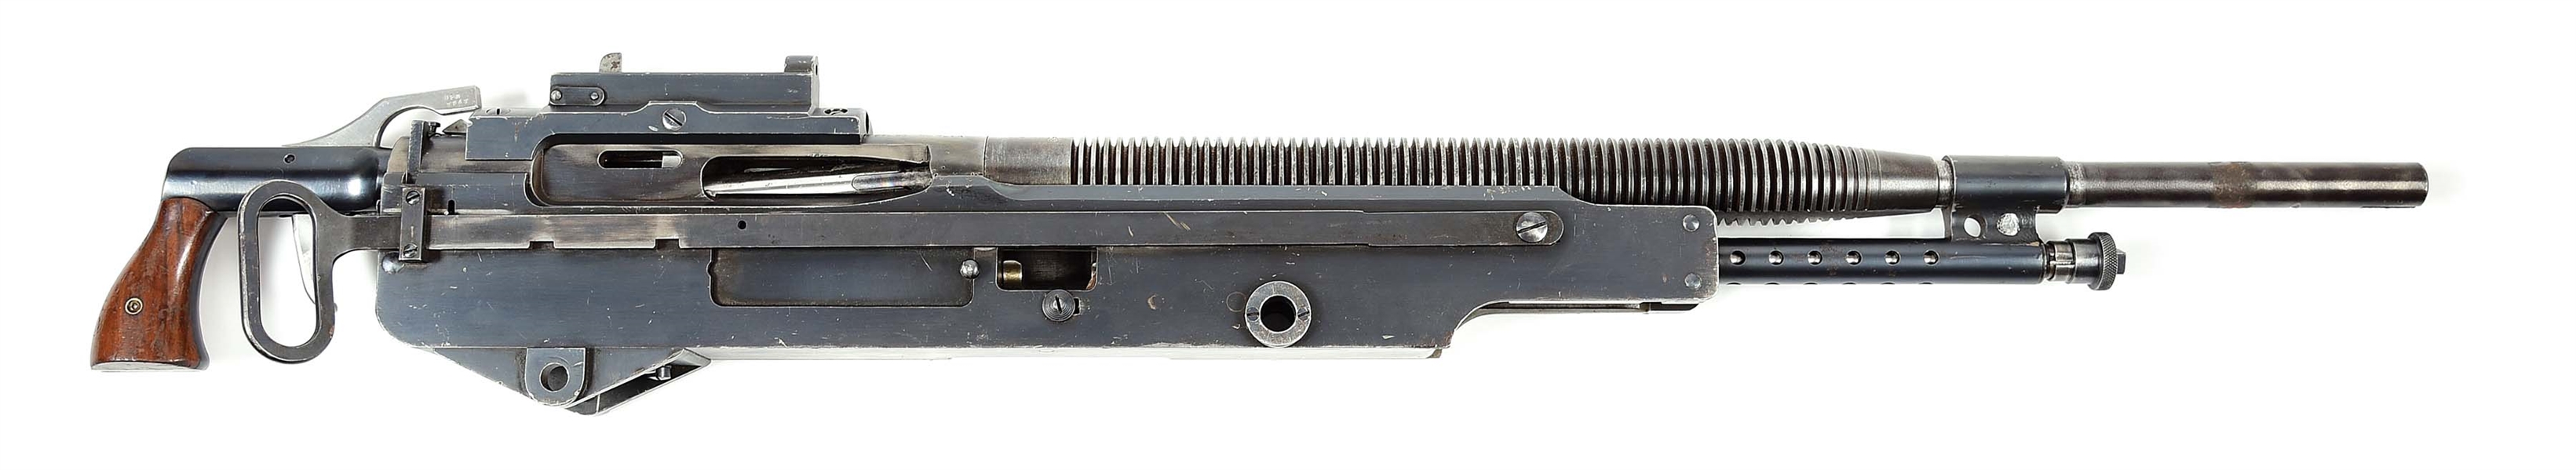 (N) SCARCE AND DESIRABLE HIGH CONDITION MARLIN ROCKWELL MODEL 1917 “DIGGER” MACHINE GUN WITH SIDE COCKING CHARGING HANDLE (CURIO & RELIC).